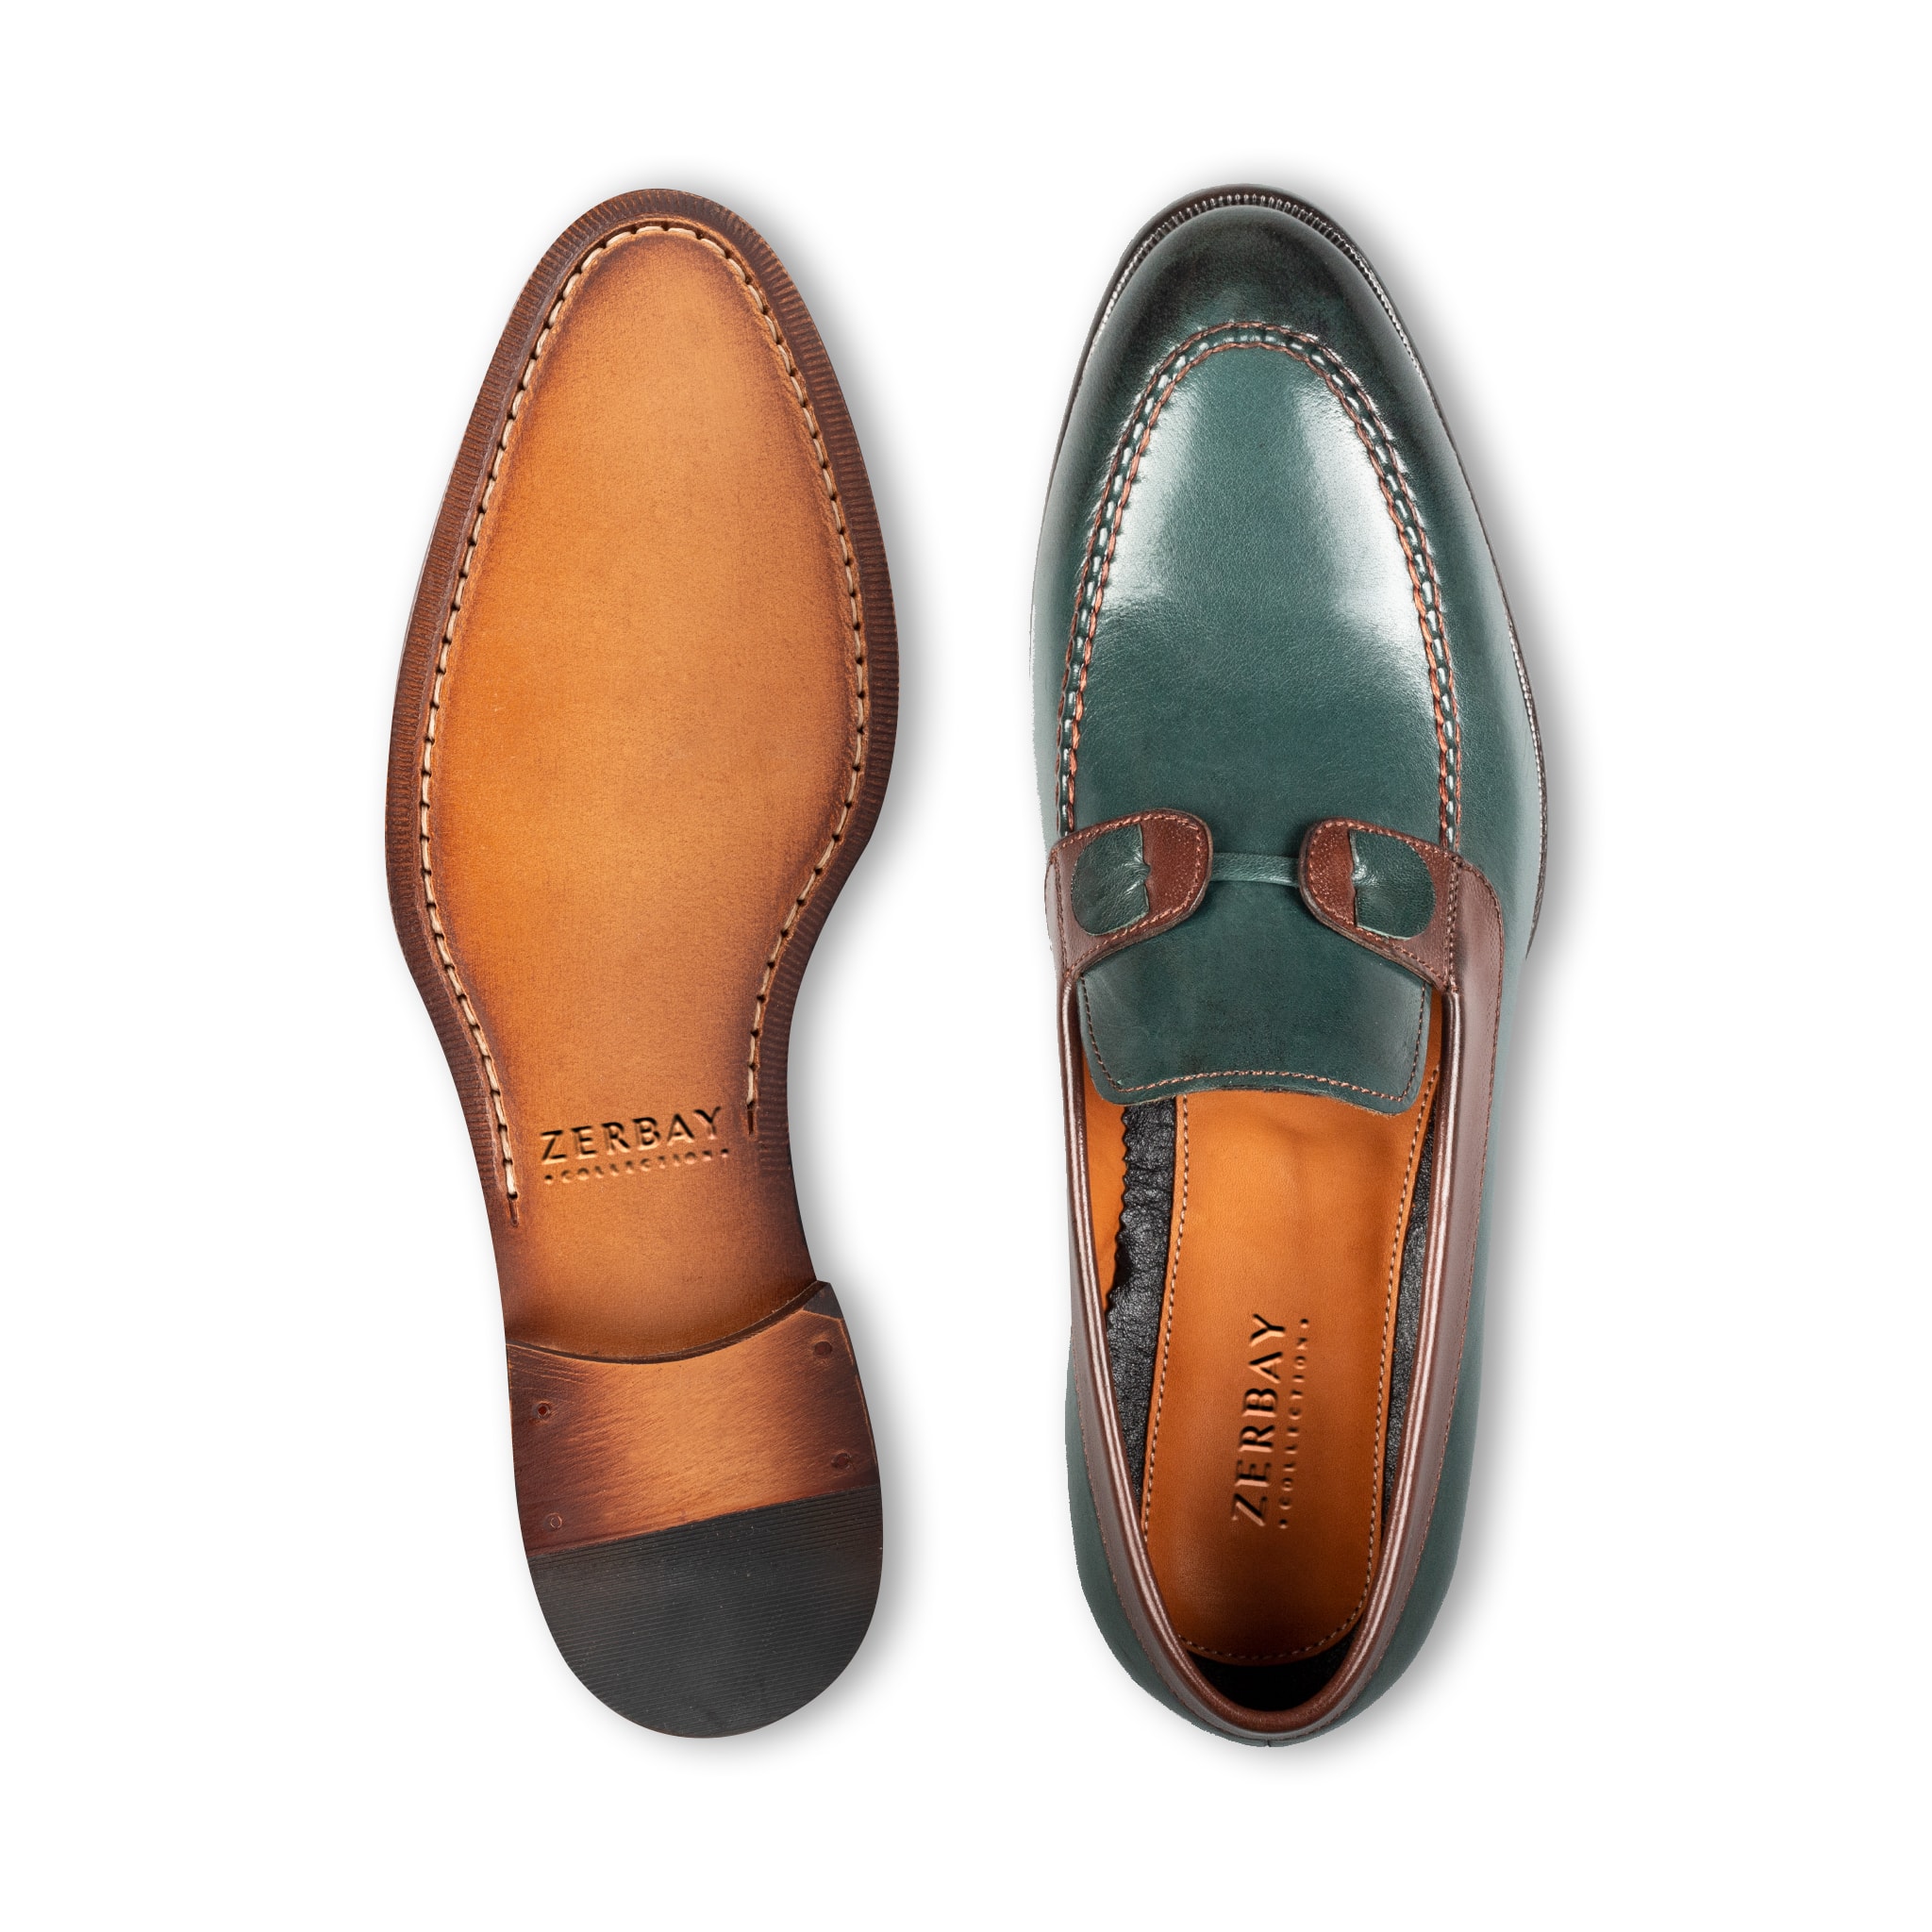 TAHAN | GREEN | Zerbay Handcrafted Leather Shoes